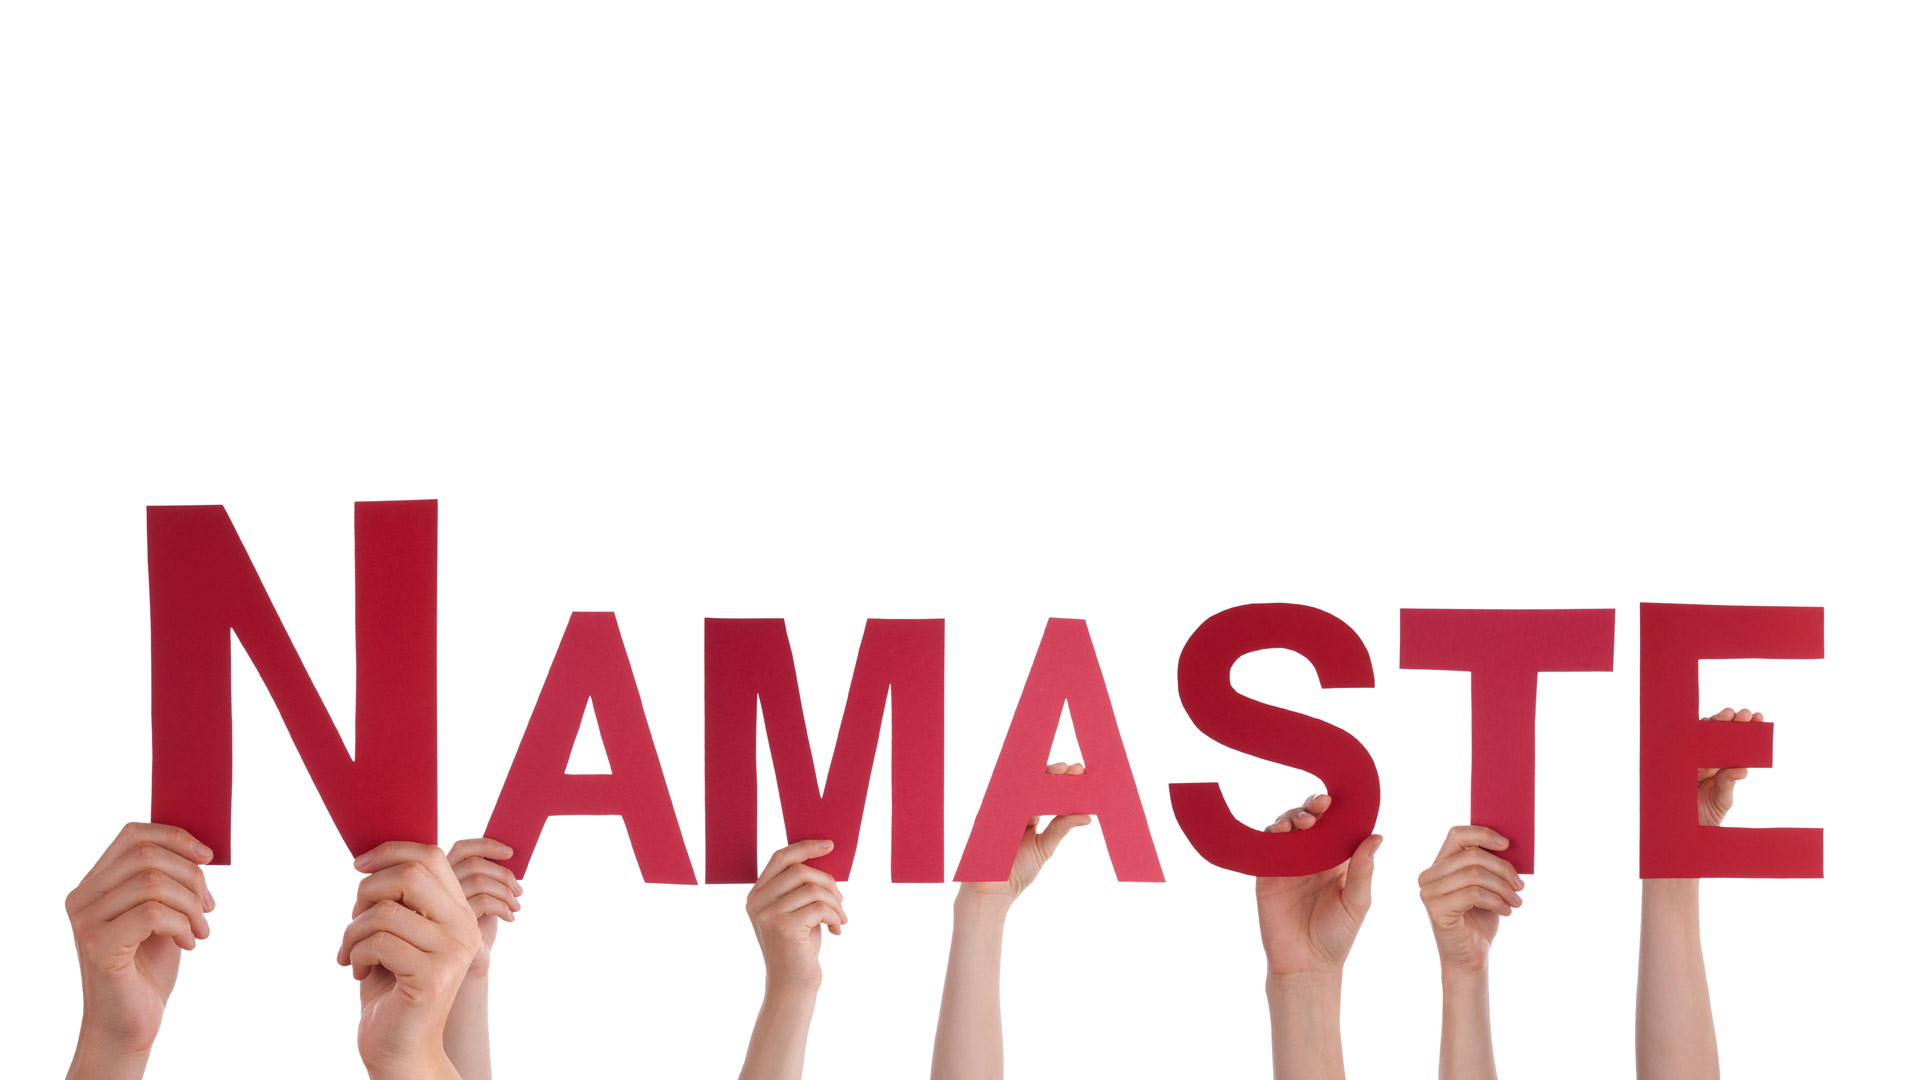 Hands of several people holding cut out letters for the word Namaste (in red)